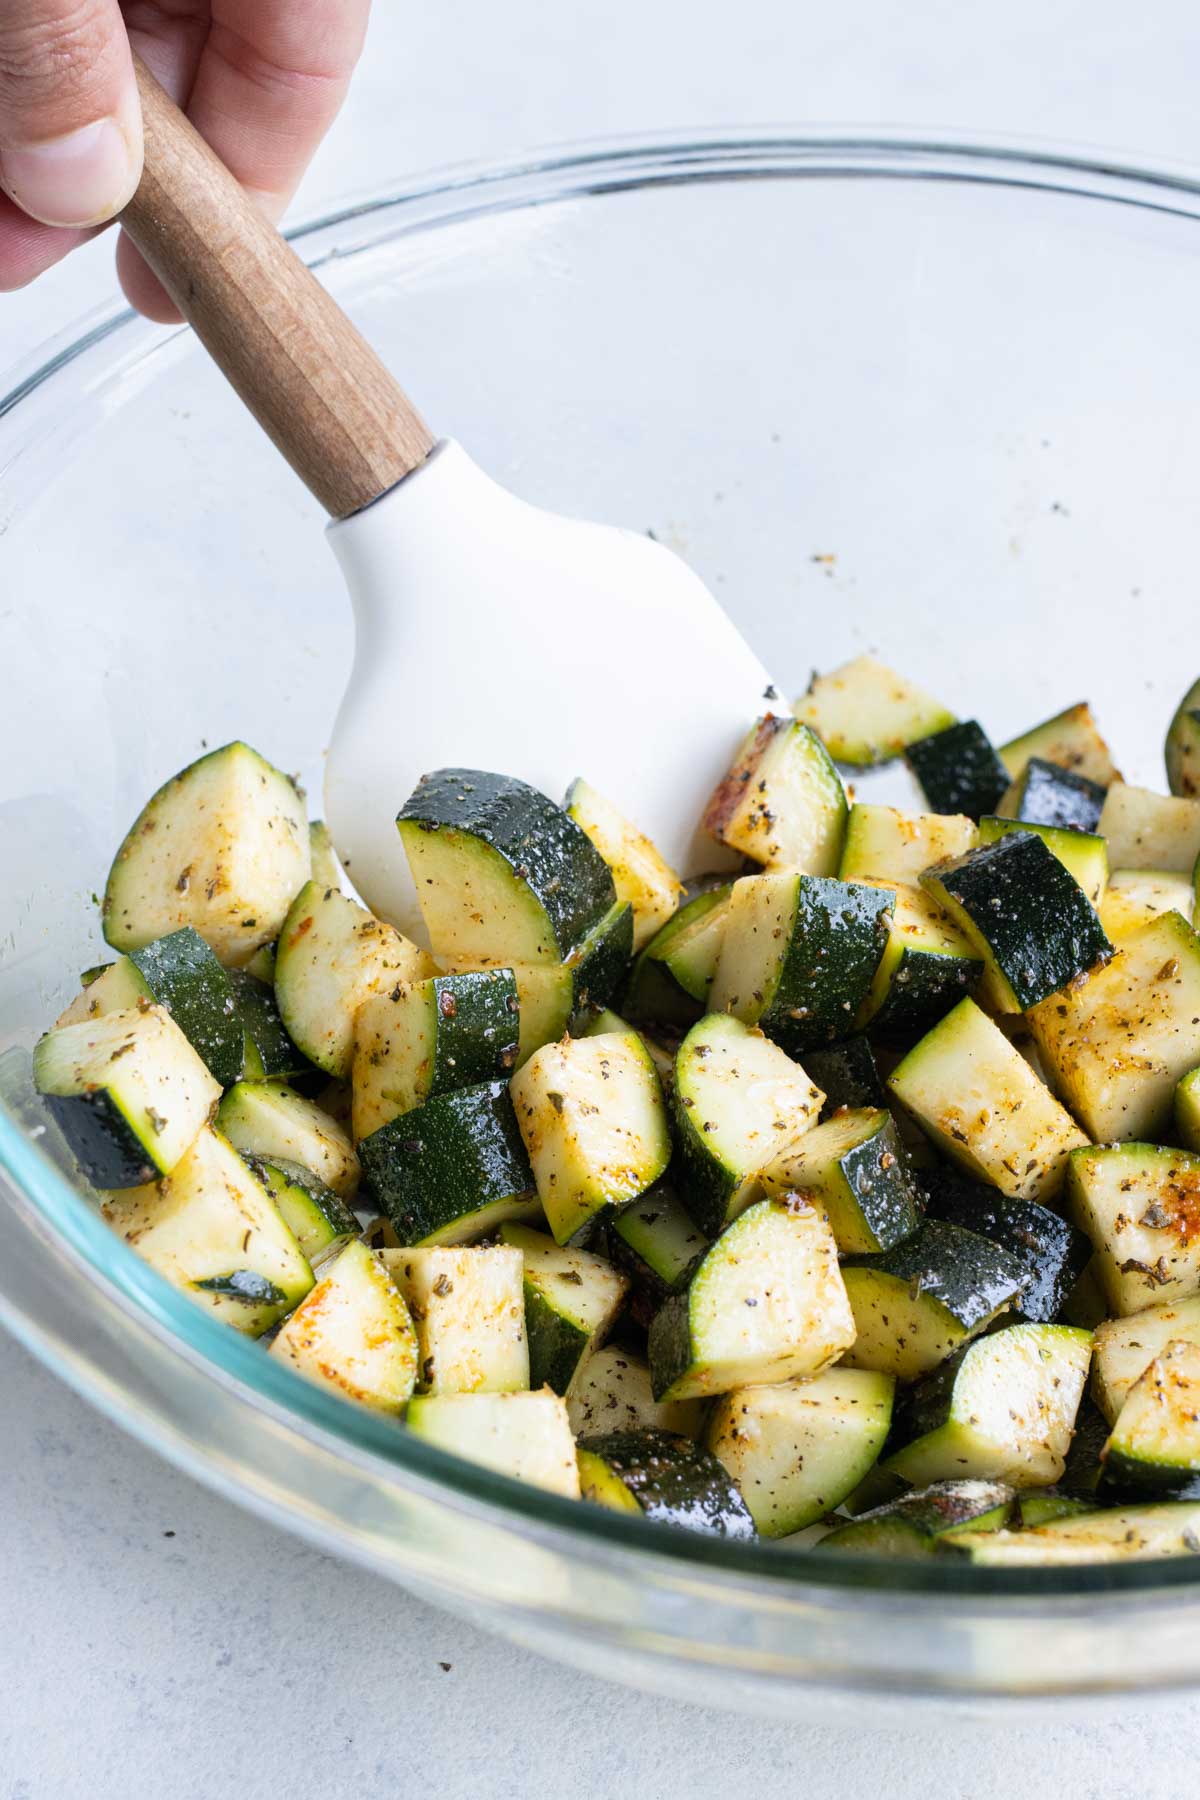 A spatula stirs seasoning zucchini pieces before air frying.